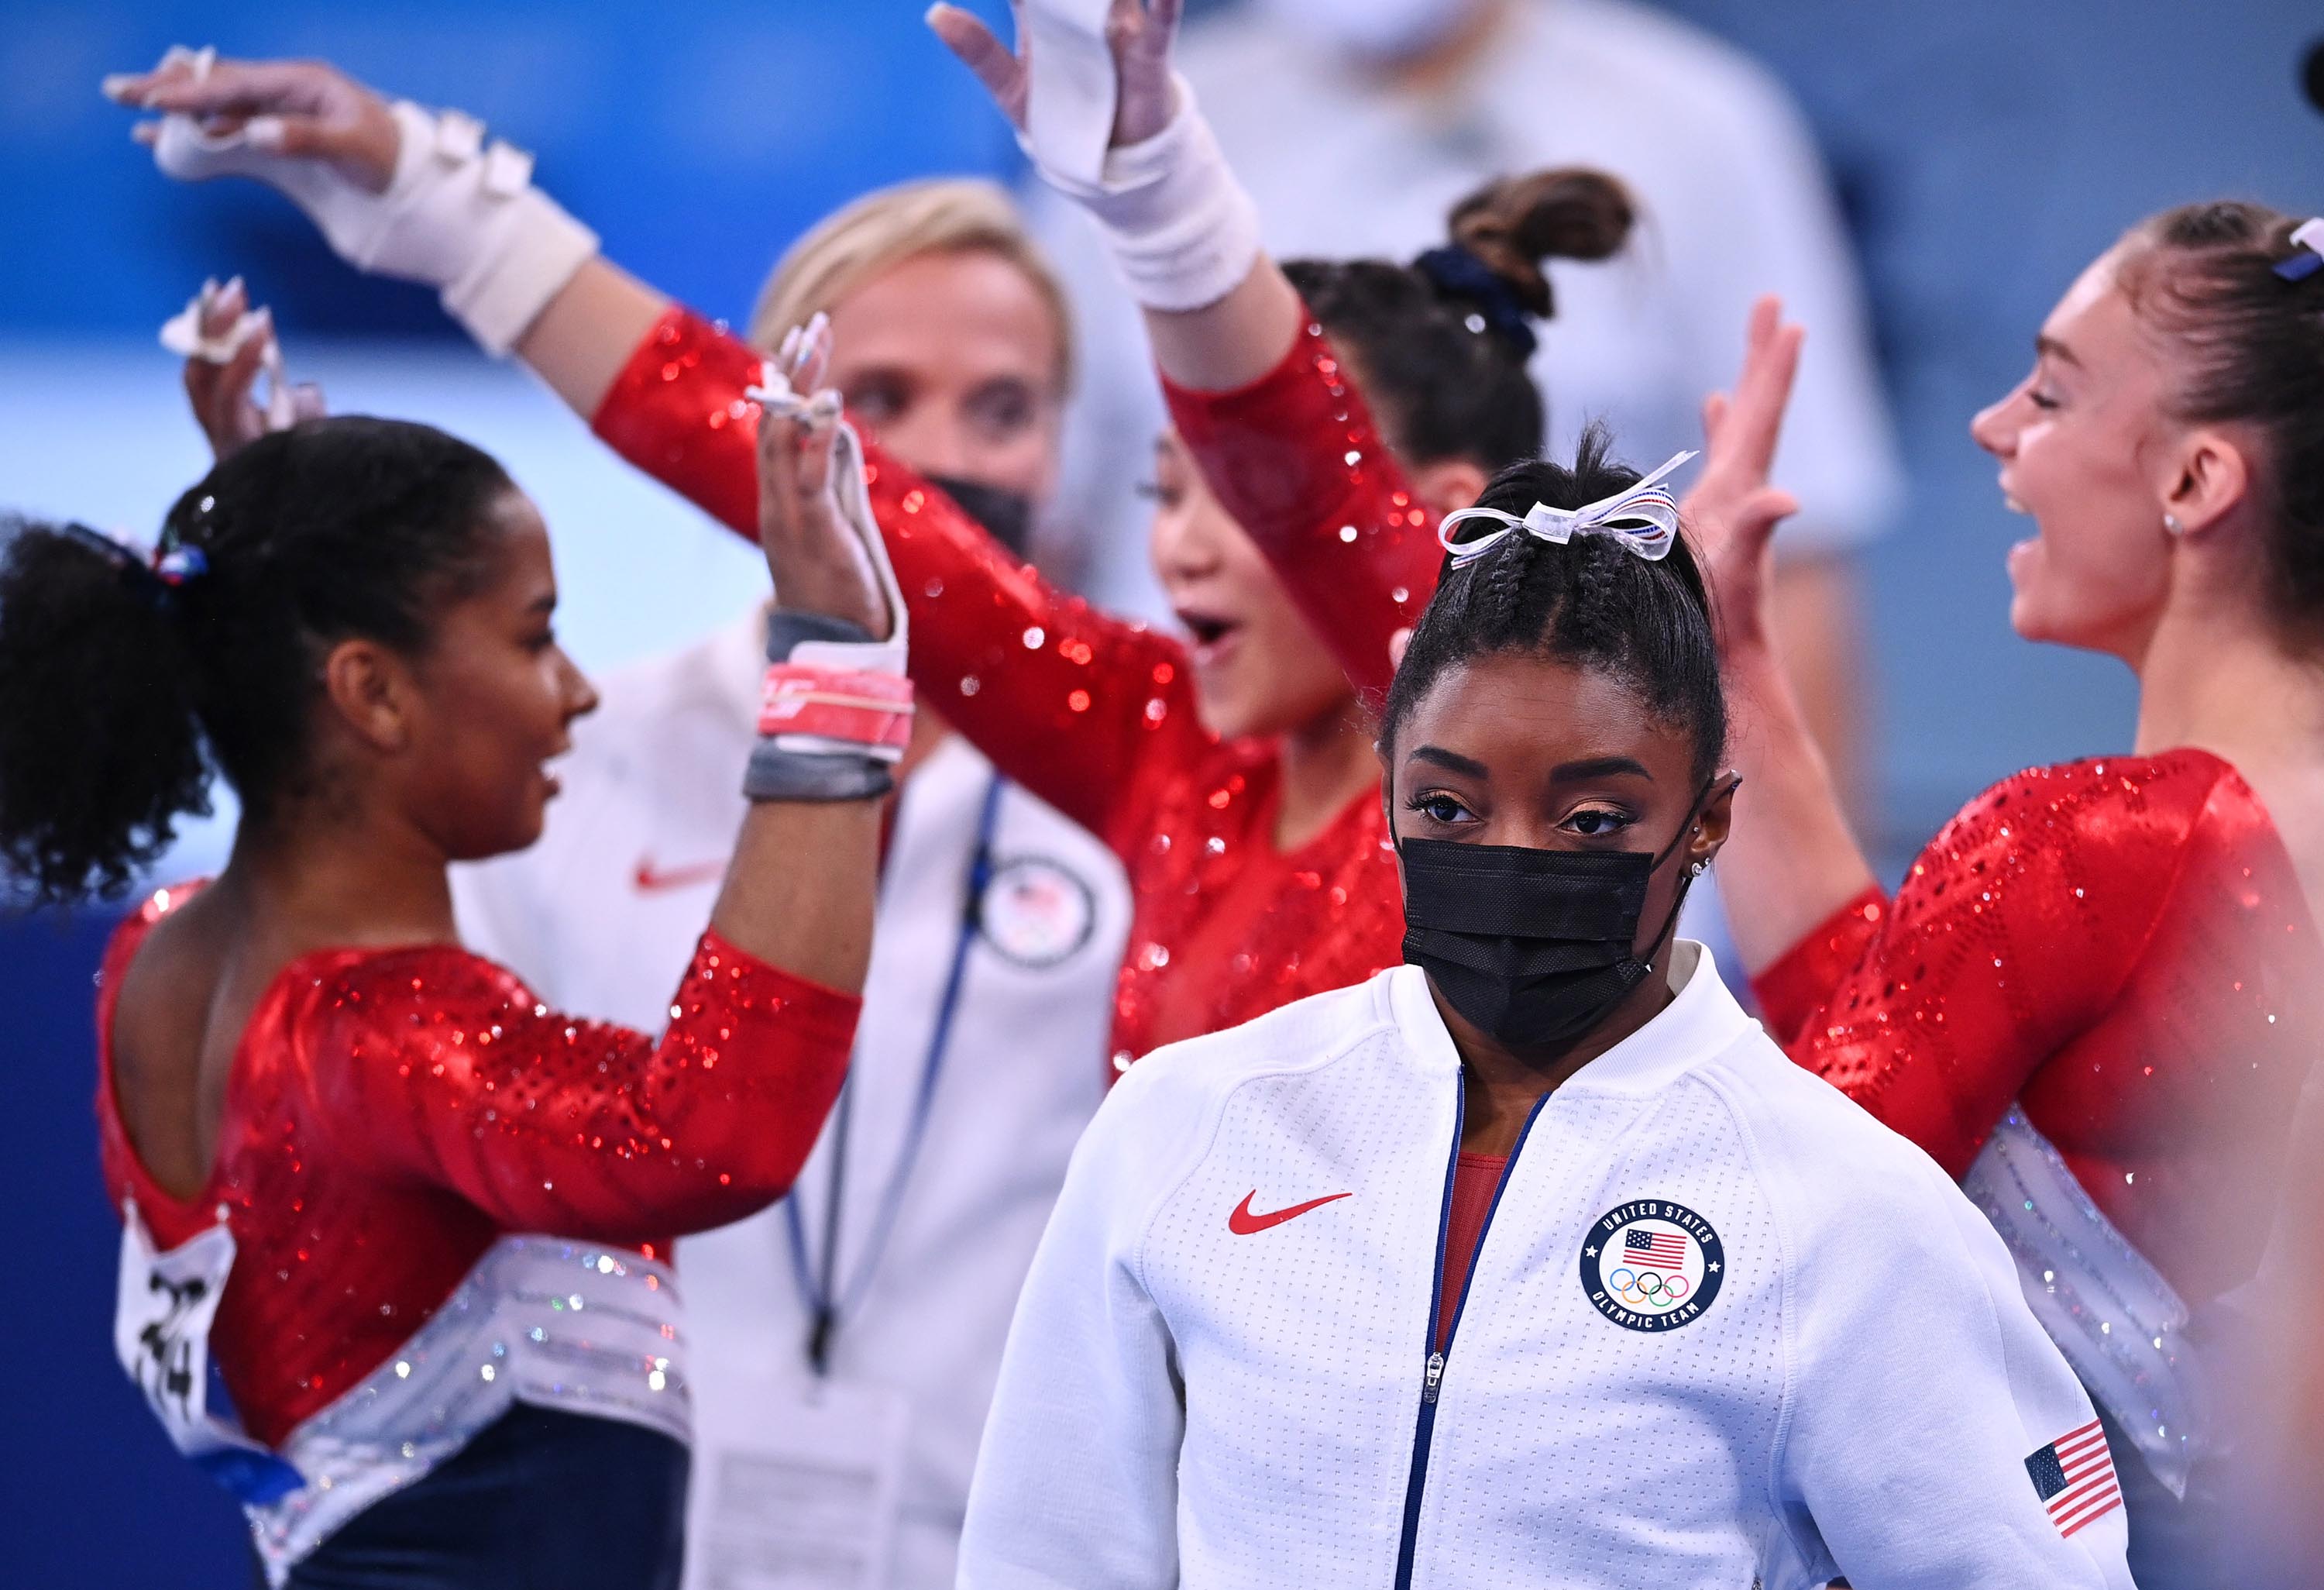 US gymnast Simone Biles wears her warm-up gear after she pulled out of the team all-around competition on Tuesday, July 27.